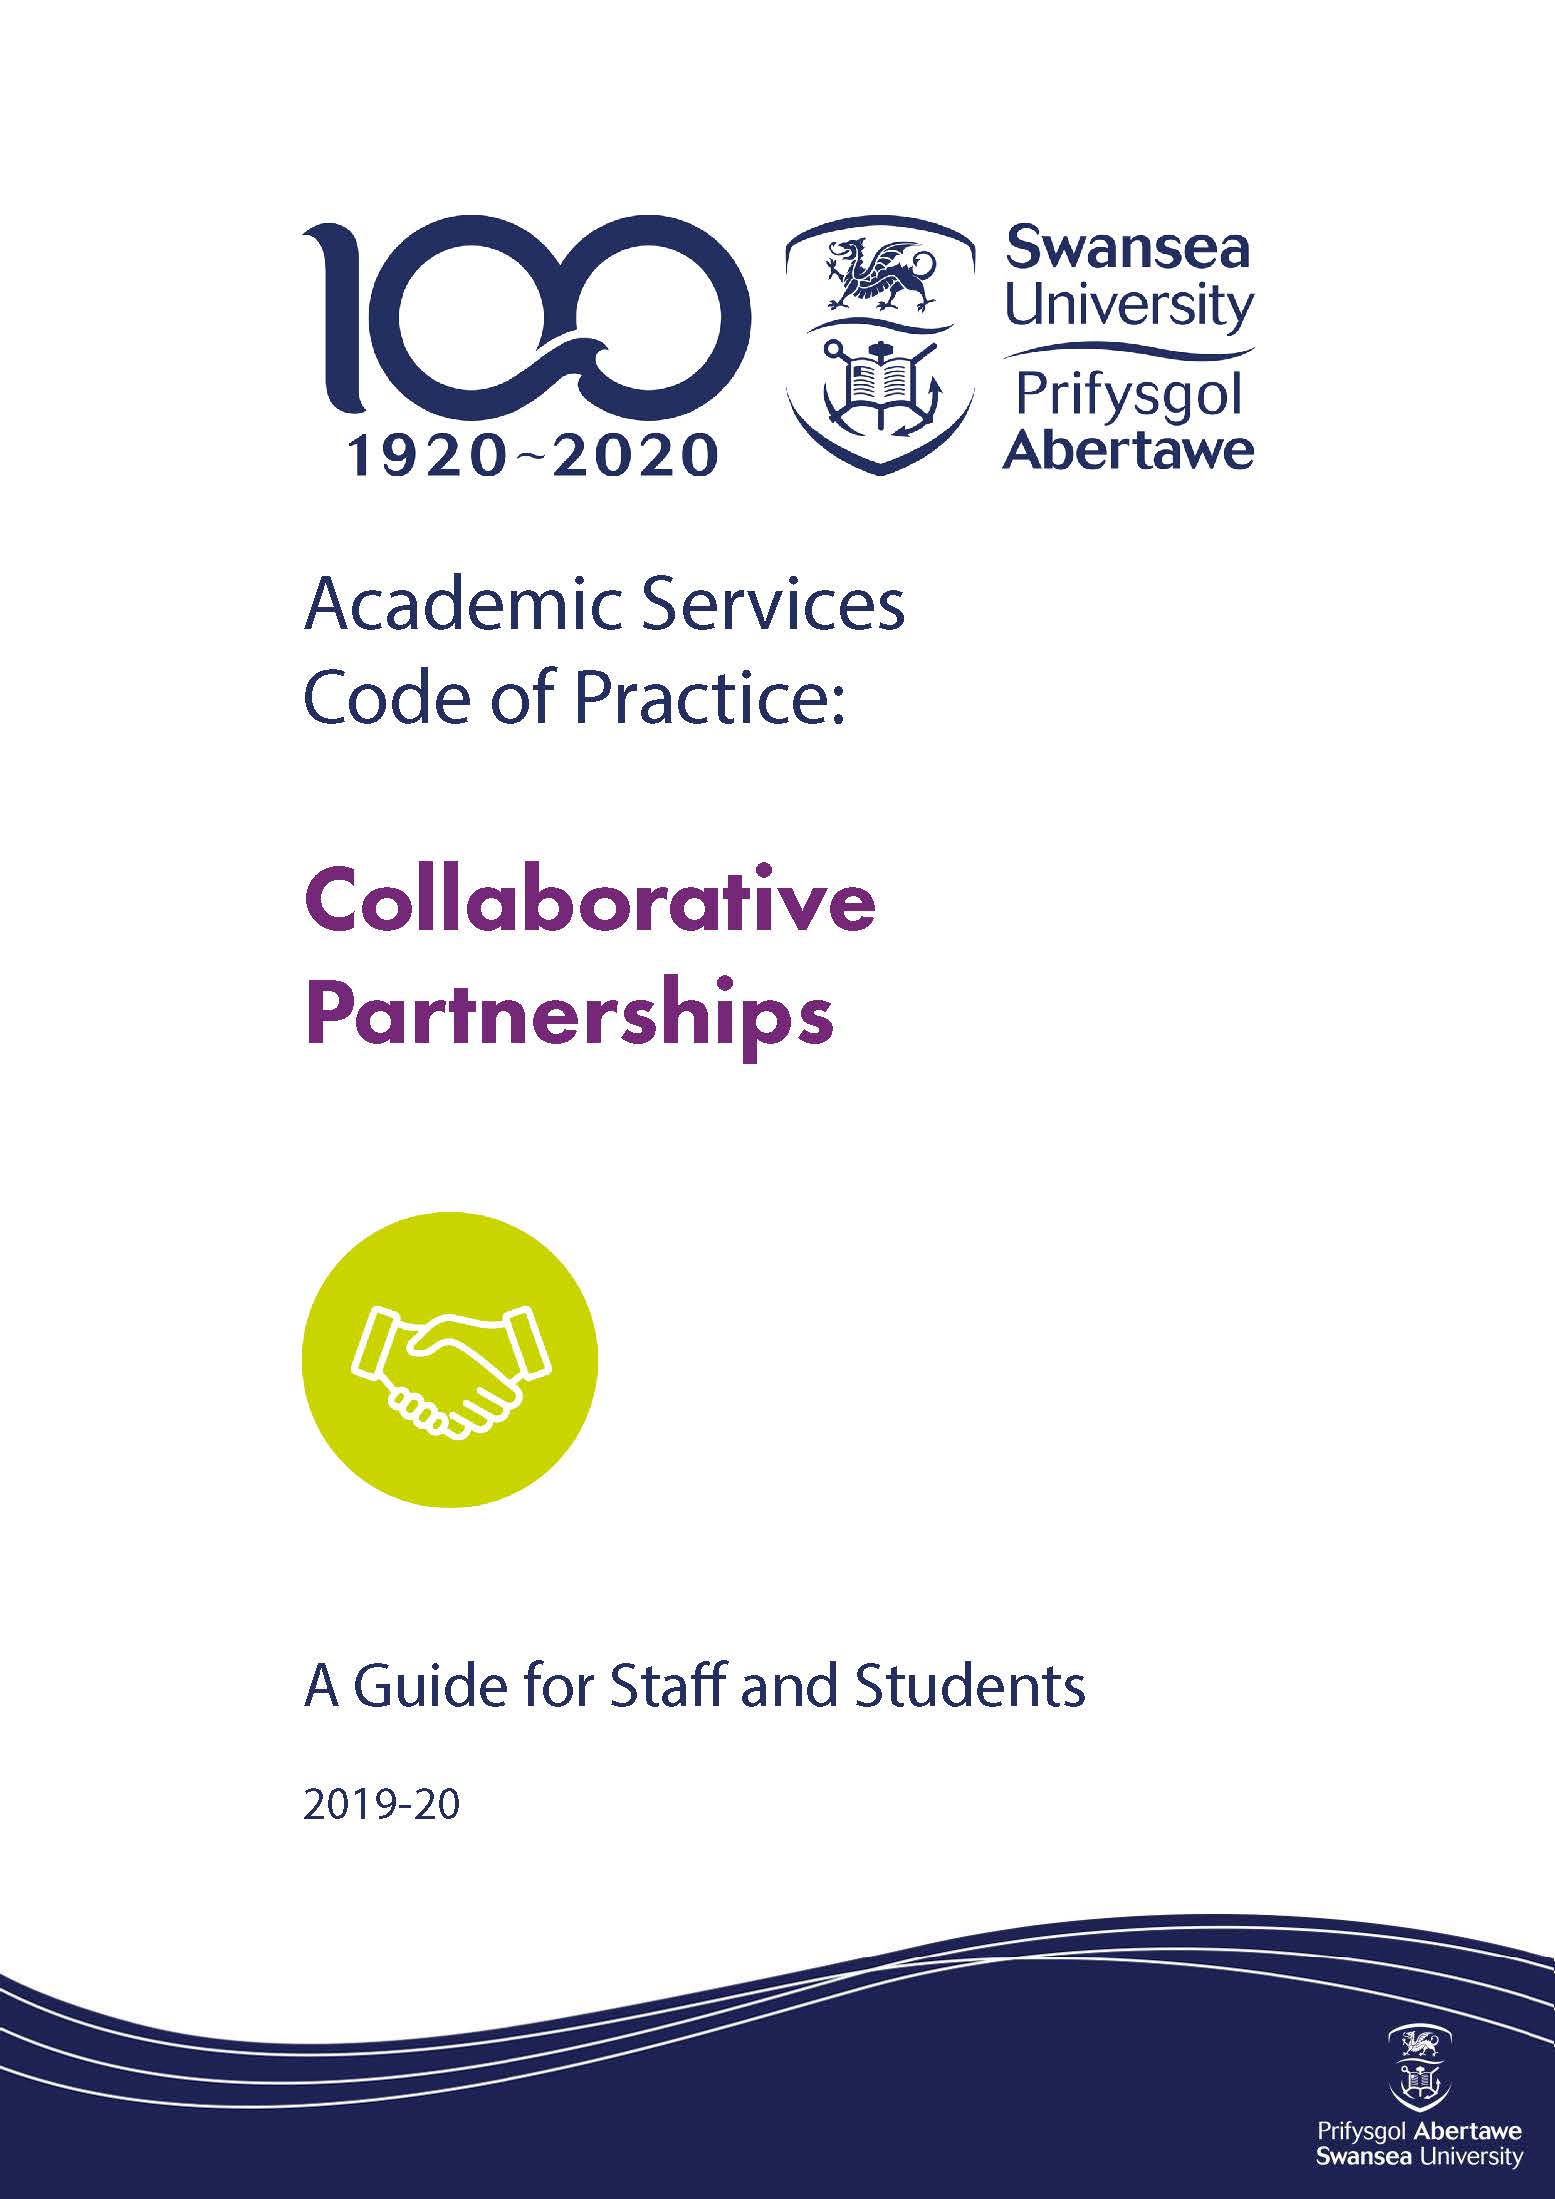 Code of Practice: Collaborative Partnerships